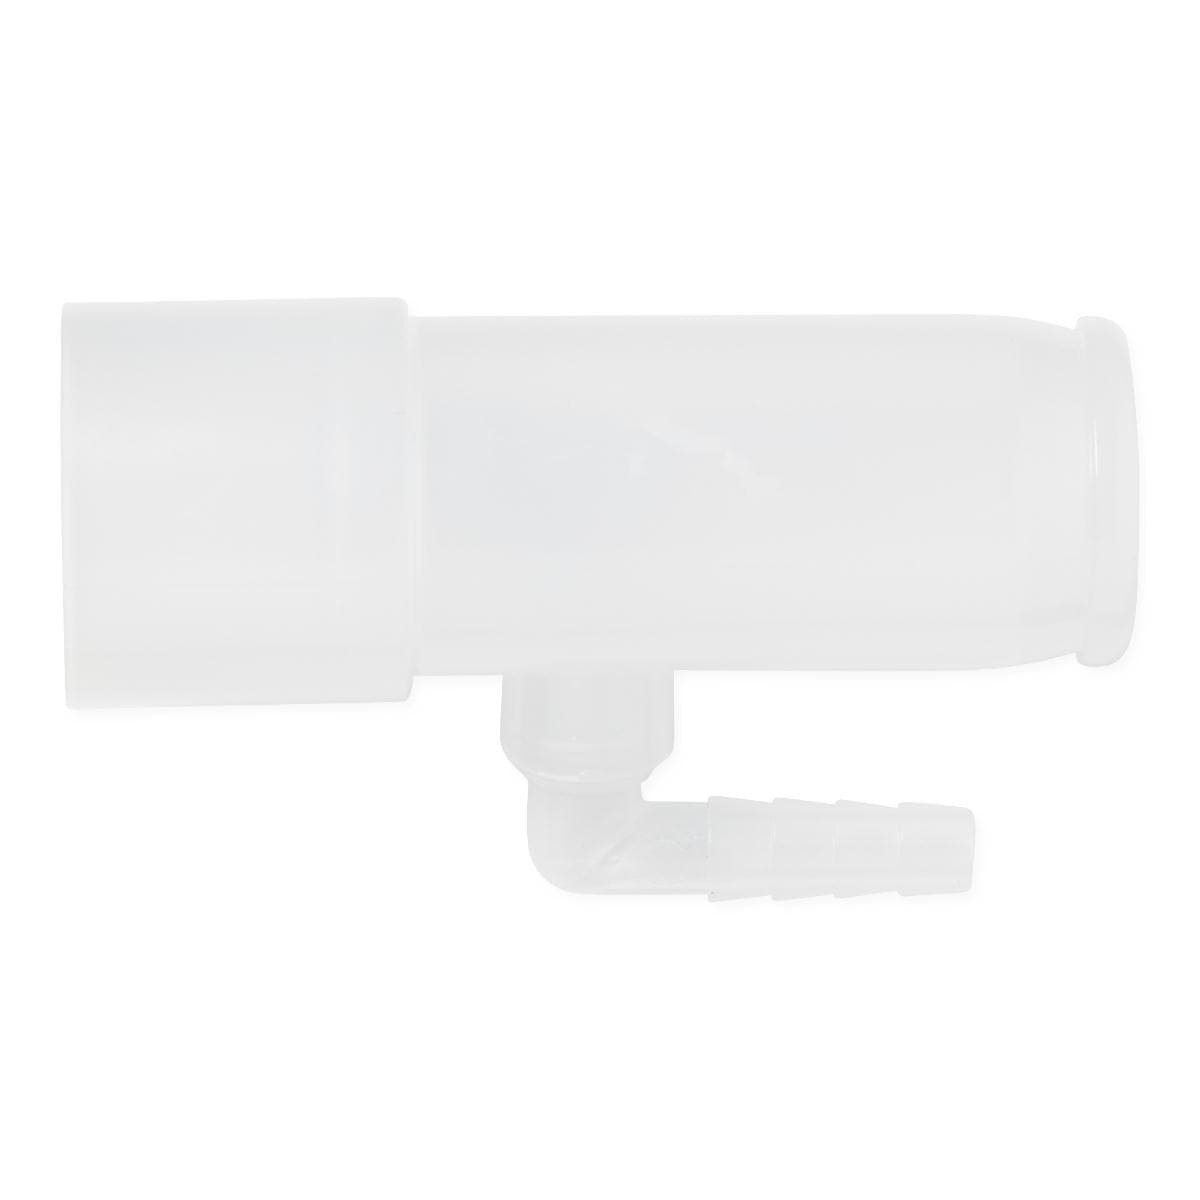 Medline Oxygen Adapters and Connectors - Senior.com Oxygen Adapters & Connectors